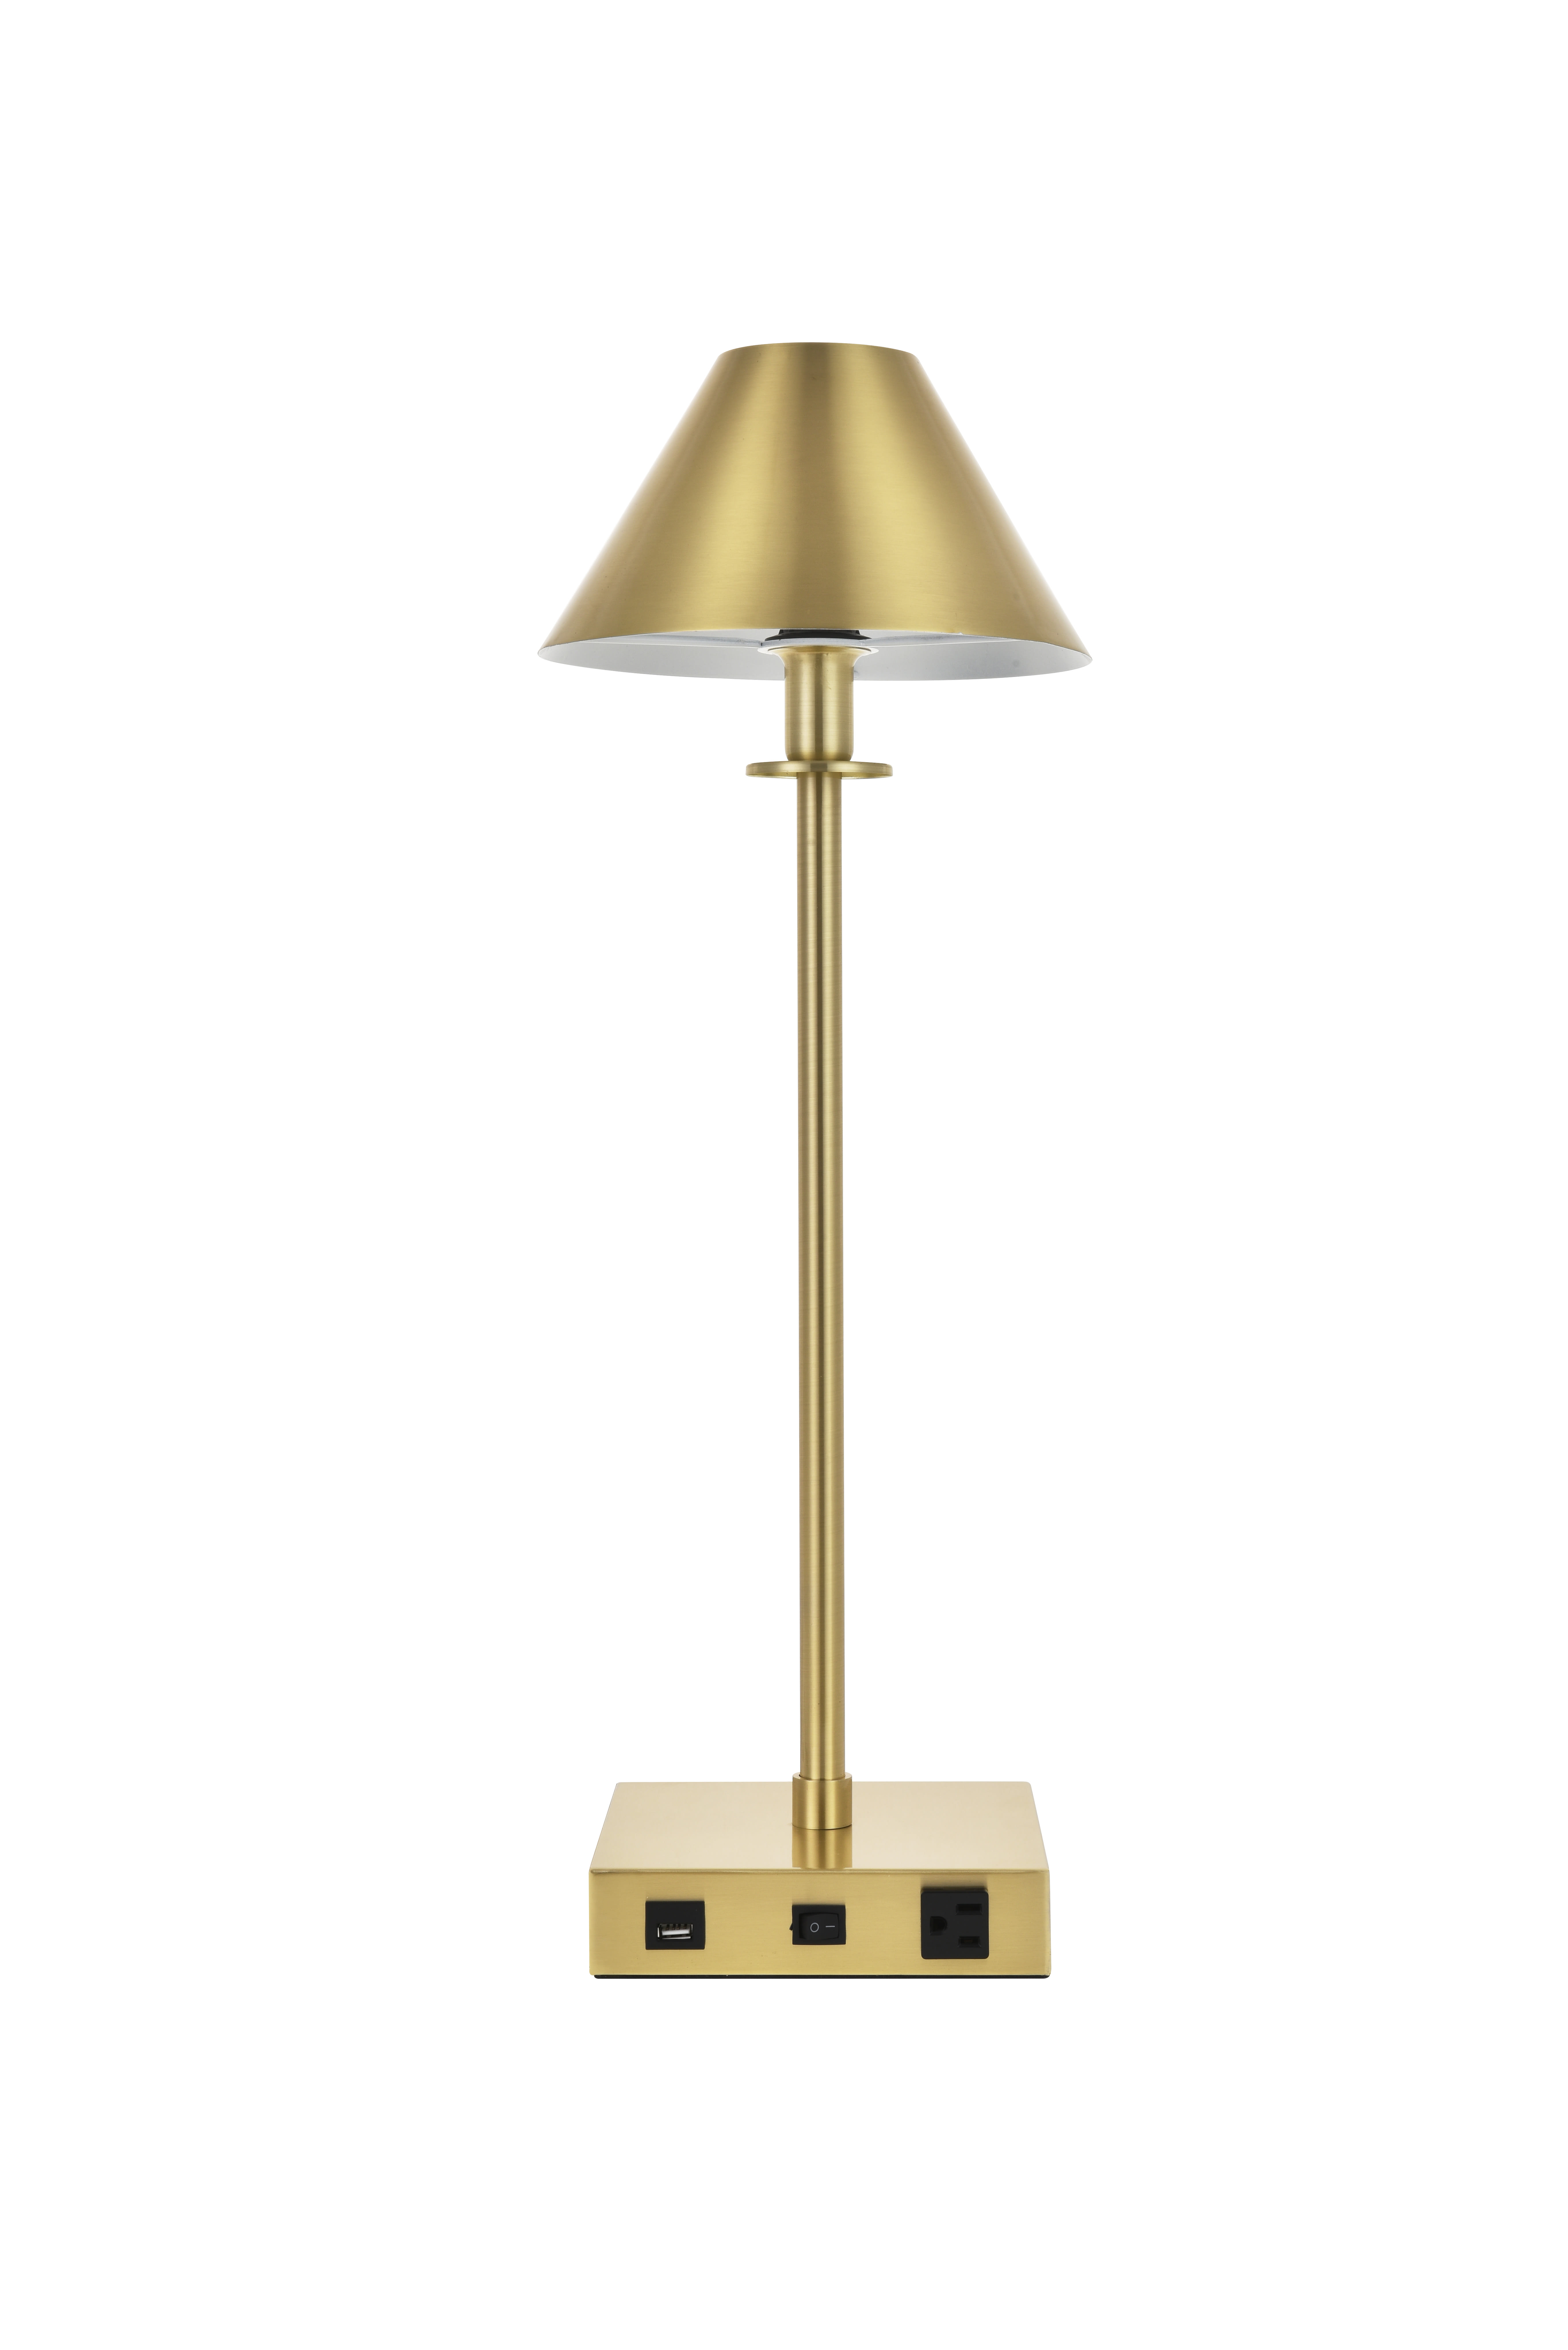 Elegant Lighting Tl3004 Brushed Brass, Tall Table Lamp With Small Shade